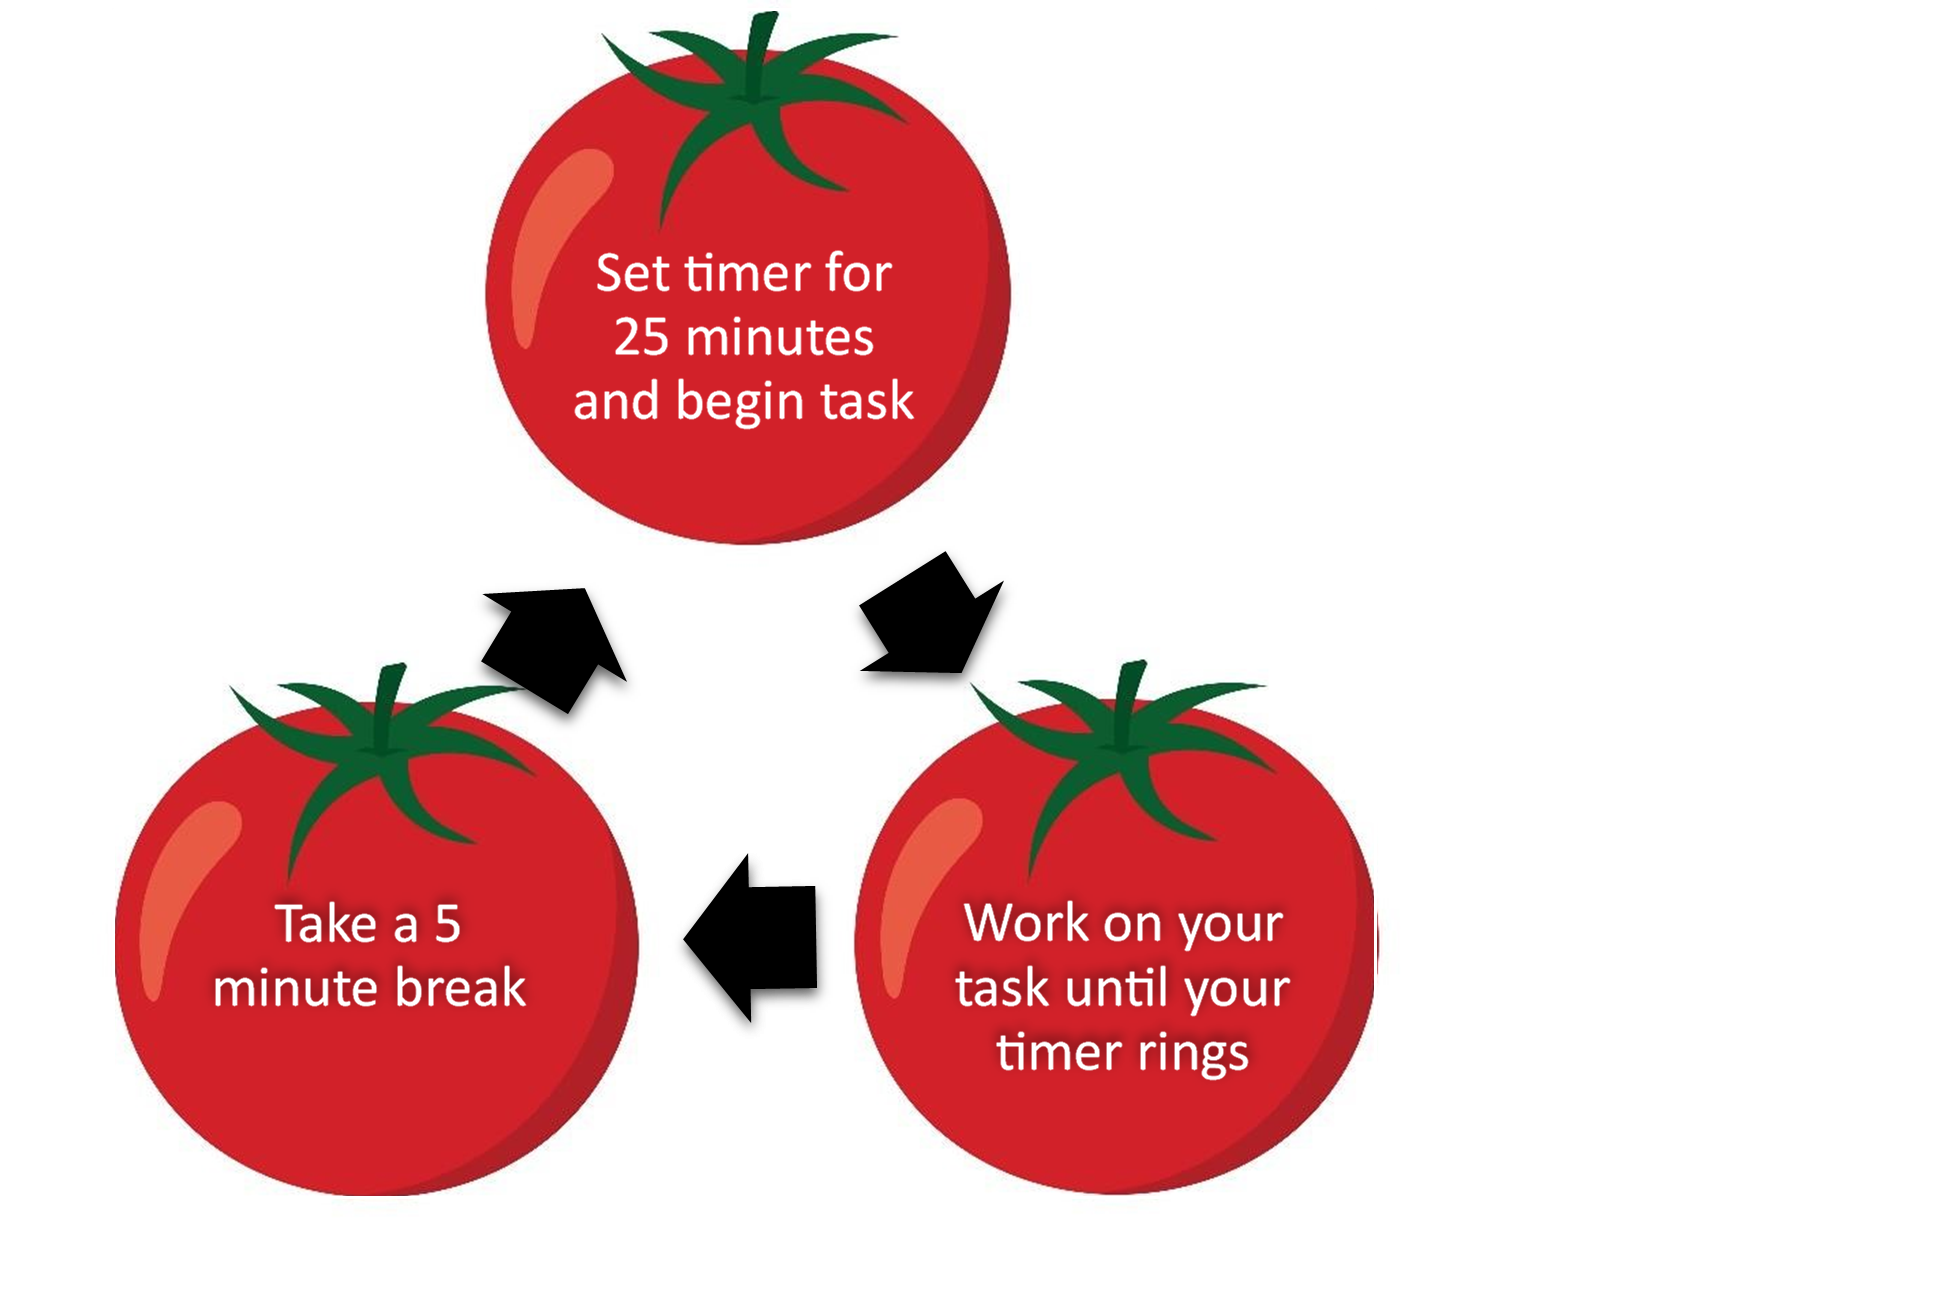 The tomatoes reflecting time in the Pomodoro Method